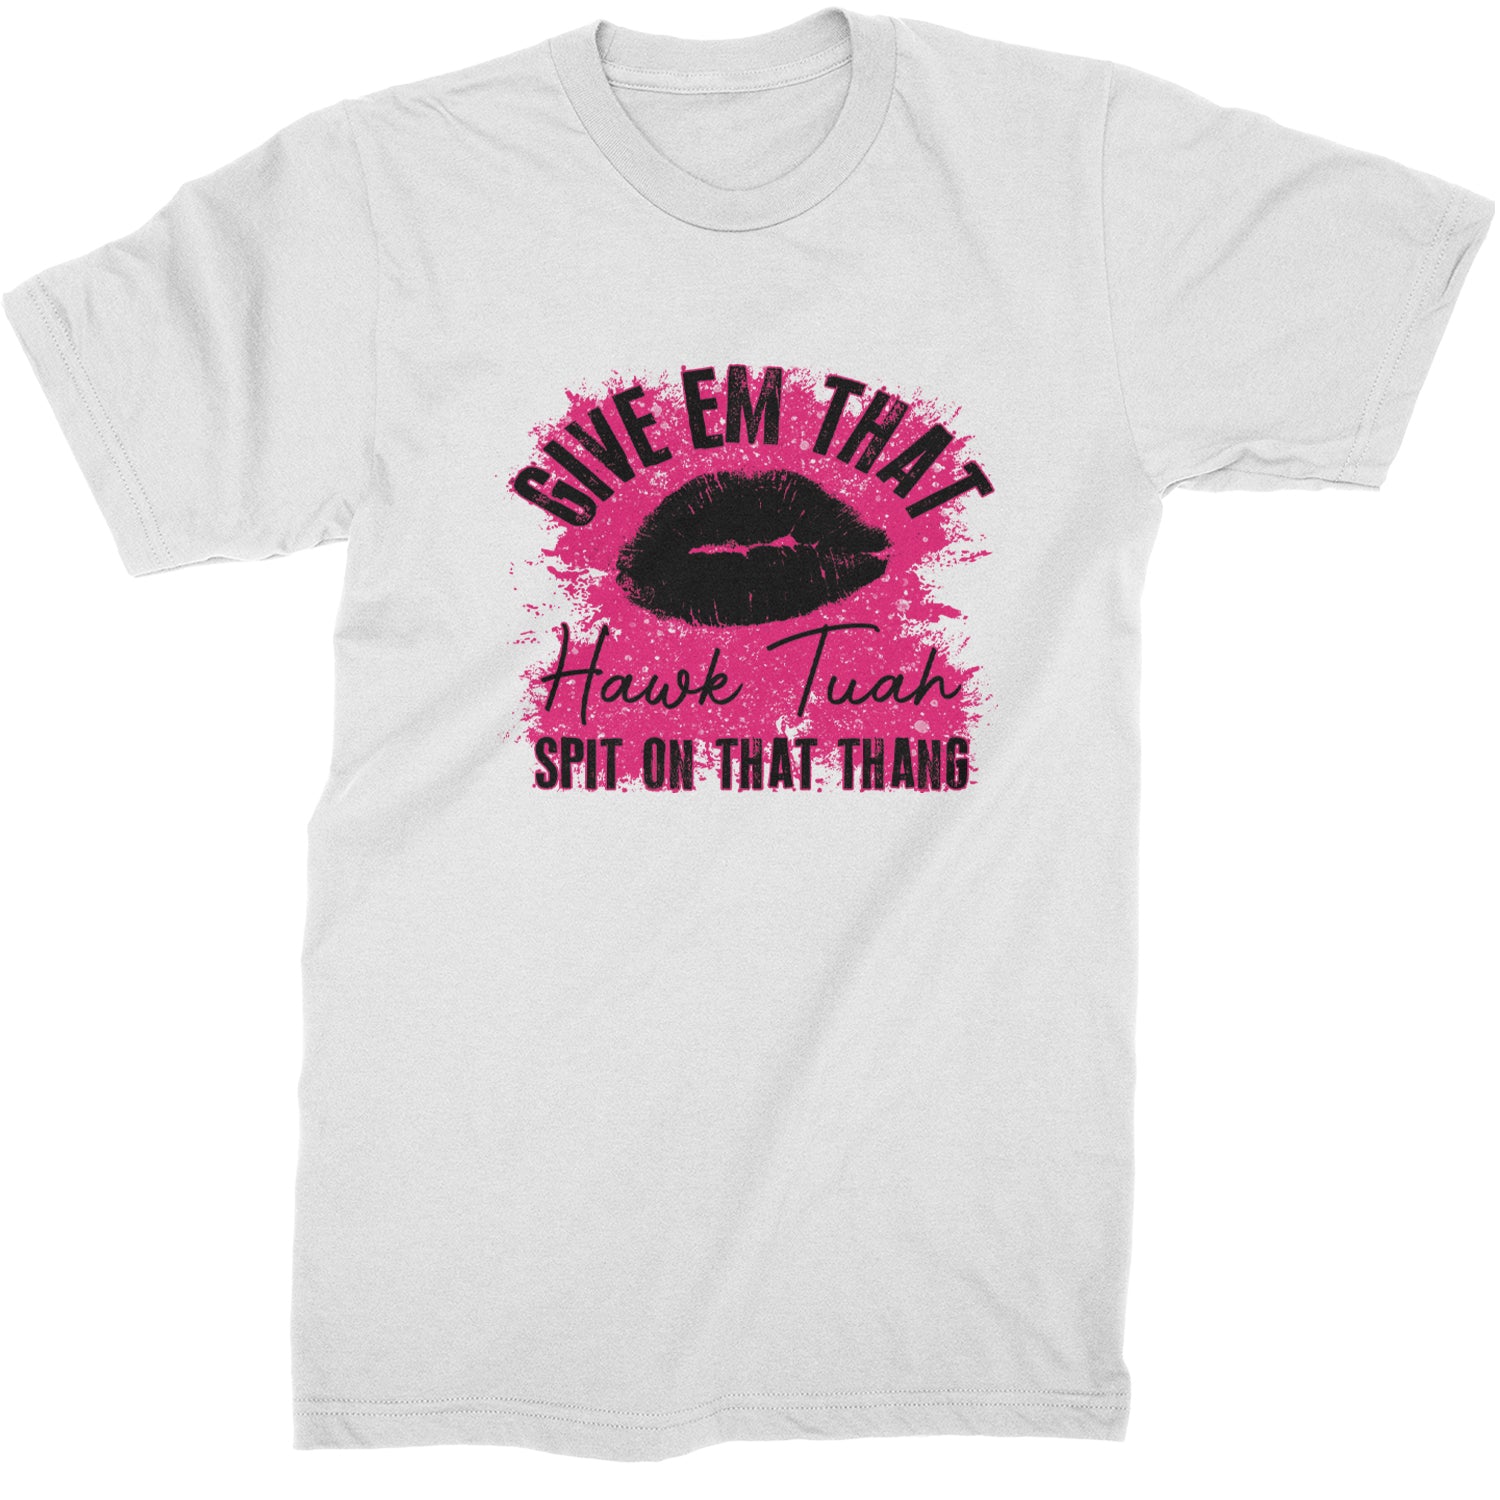 Give 'Em Hawk Tuah Spit On That Thang Mens T-shirt White